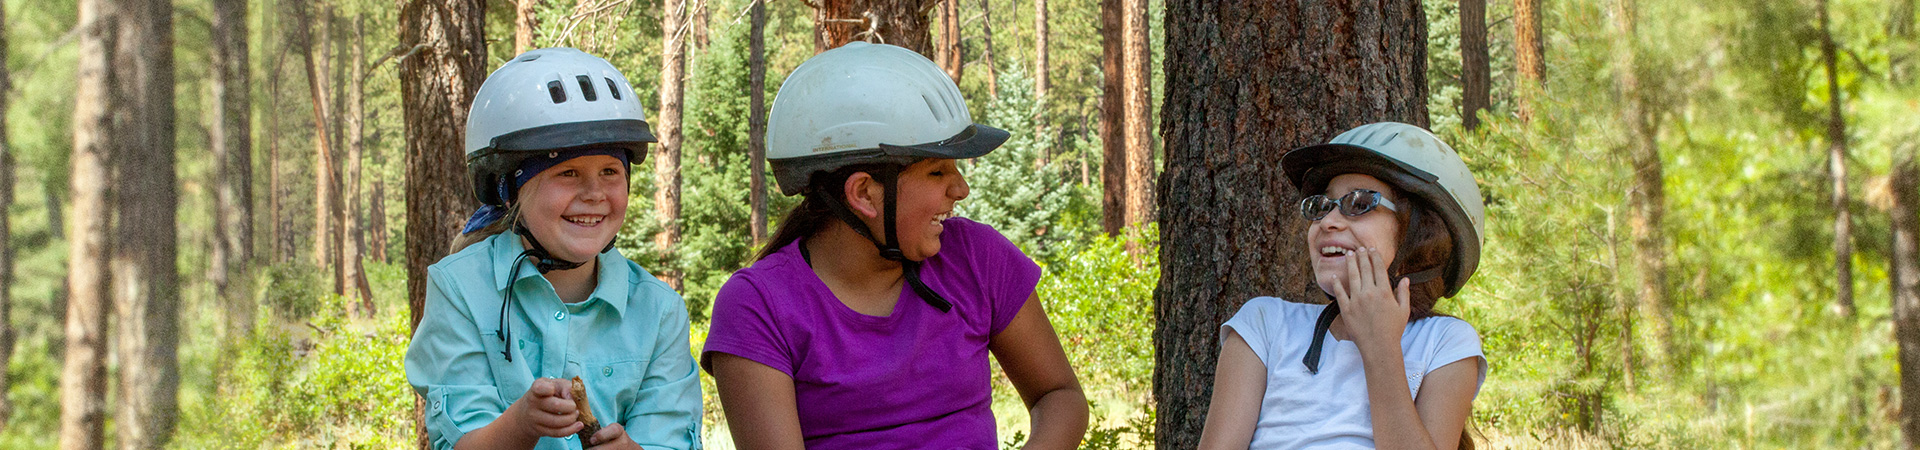  two girl scouts and an adult wearing helmets and laughing 